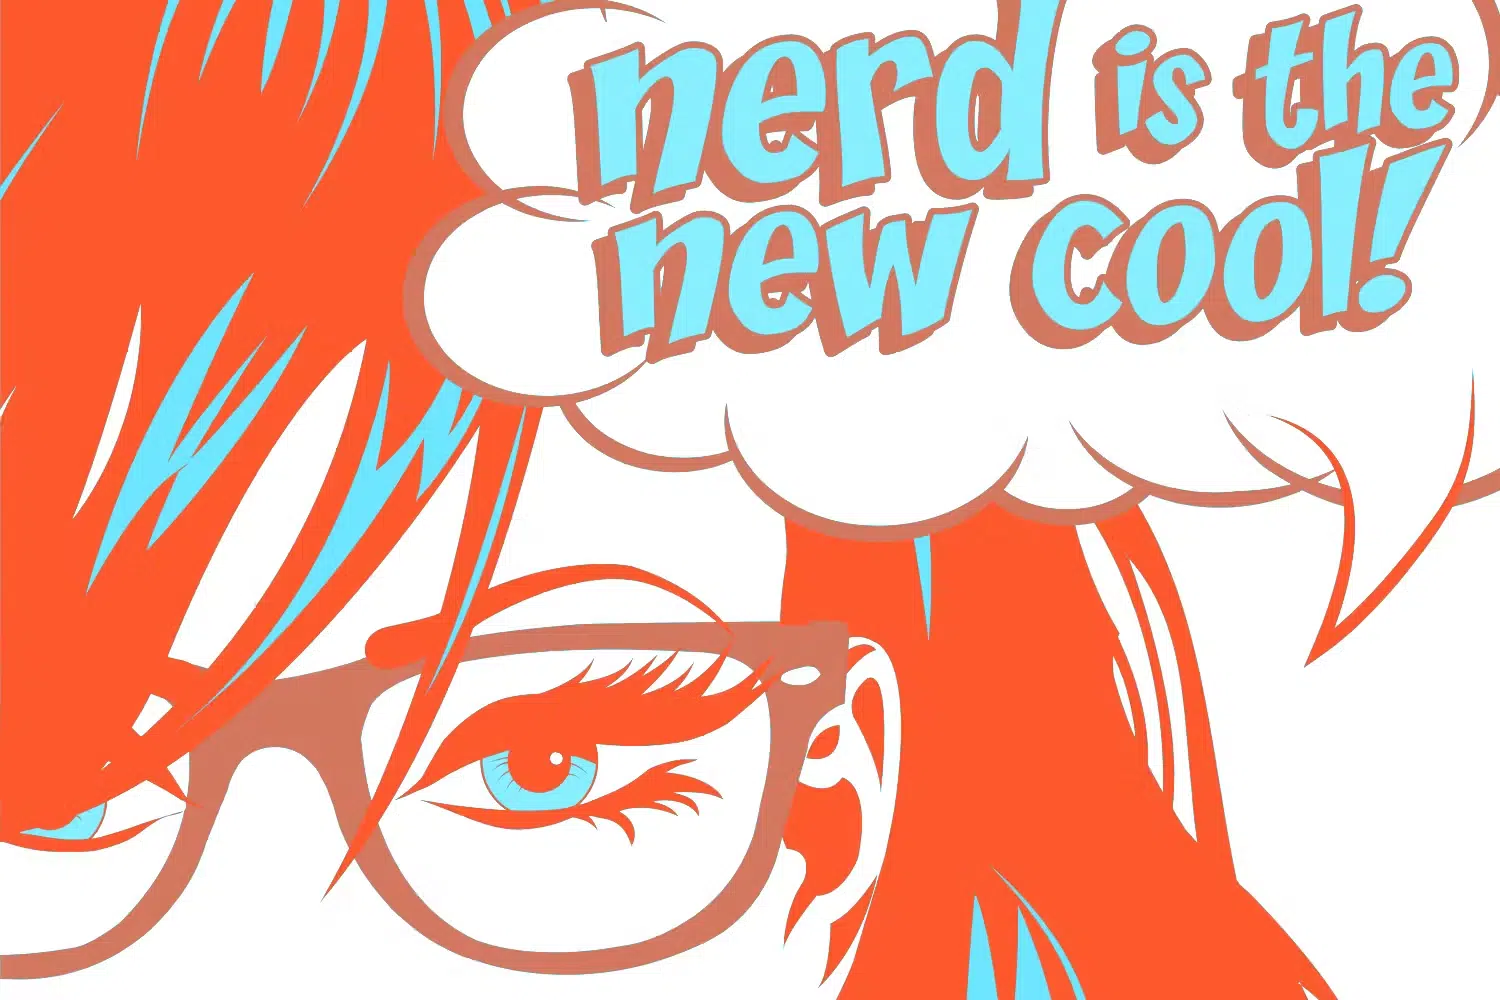 Nerd is the new cool